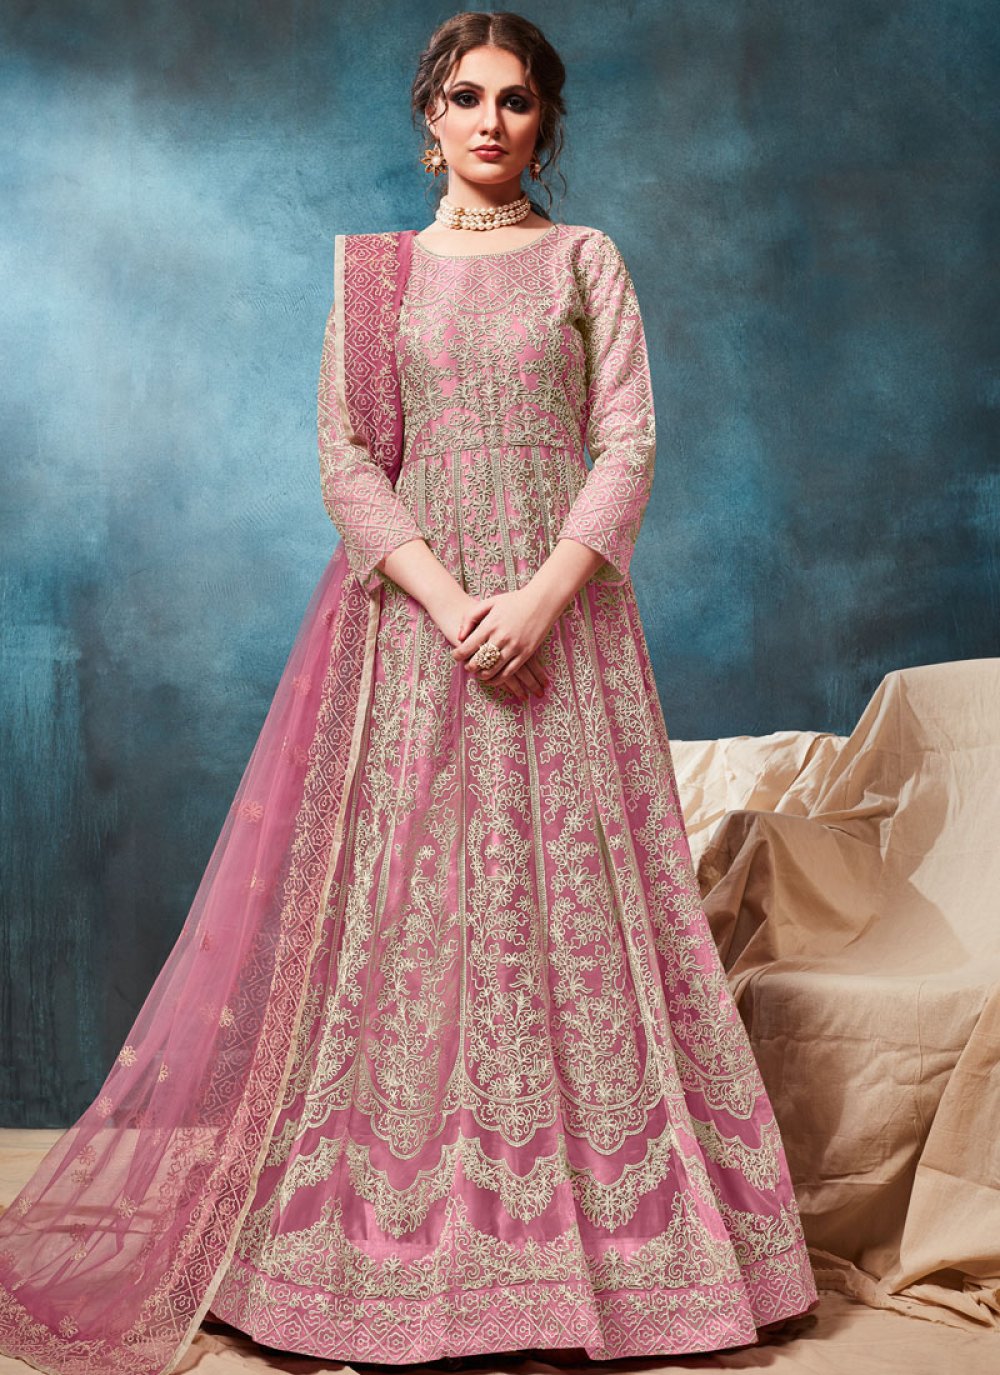 Pastel Pink Lucknowi Embroidered Anarkali Suit | Indian saree blouses  designs, Anarkali suit, Embroidered gown